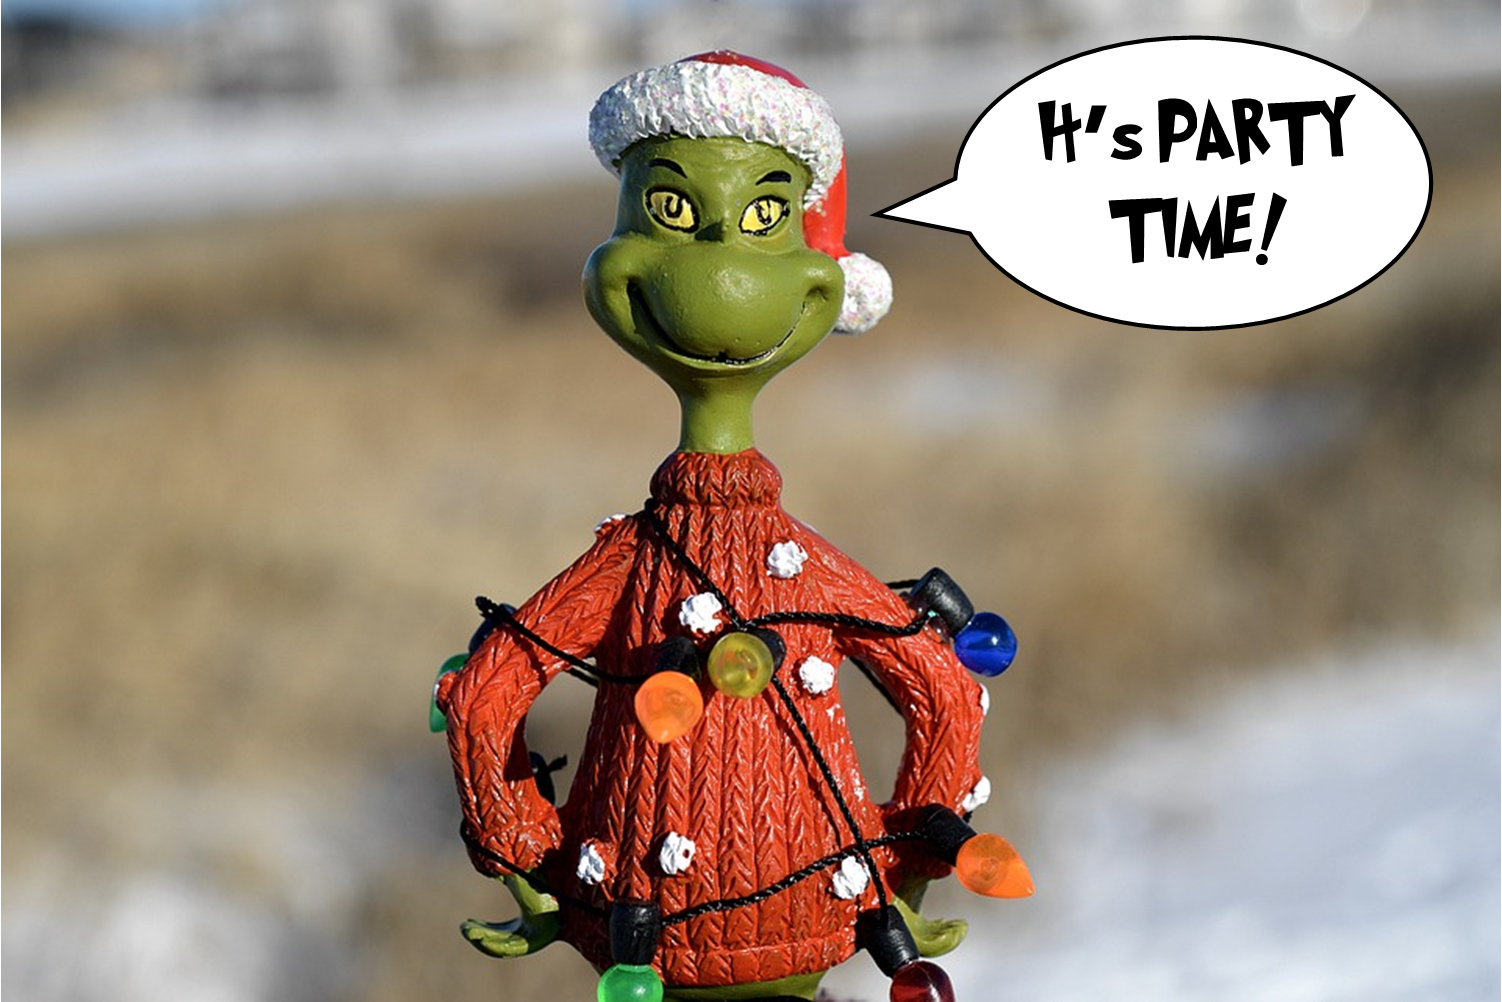 image of grinch doll saying "It's Party Time!"